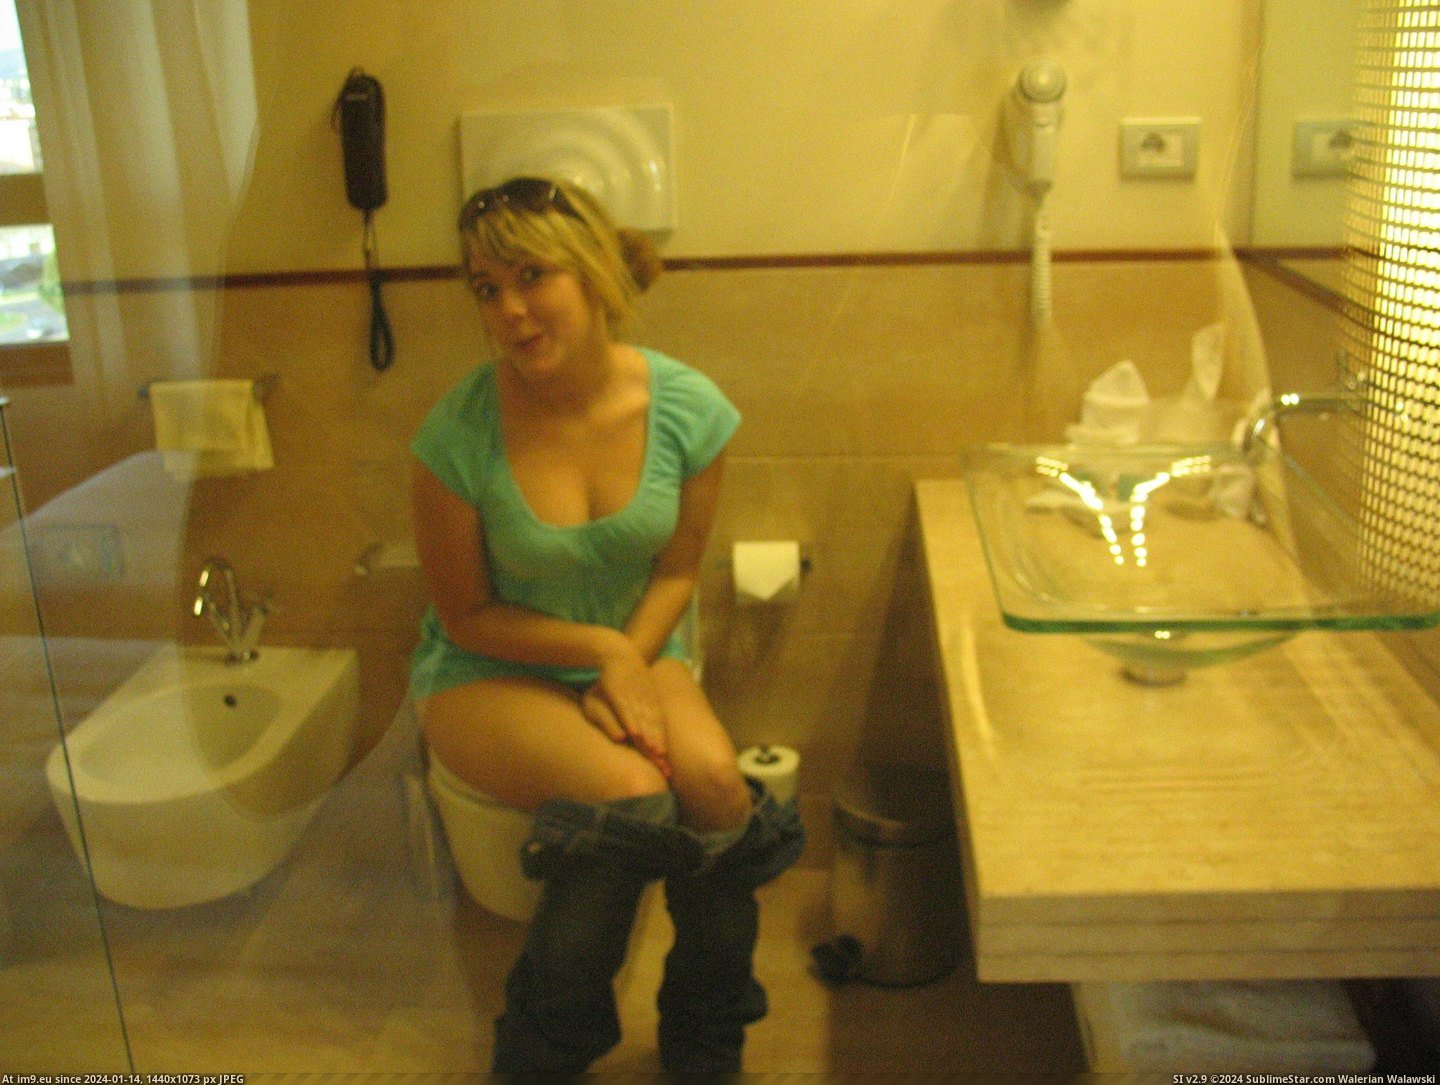 #Porn #Girls #Teen #Toilet #Bowl #Toilets #Young #Peeing #Pissing Young Teen Girls Pissing On Toilets 26 (WC toilet bowl peeing porn) Pic. (Image of album Teen Girls Pissing Porn (Young Teens Toilet Peeing)))